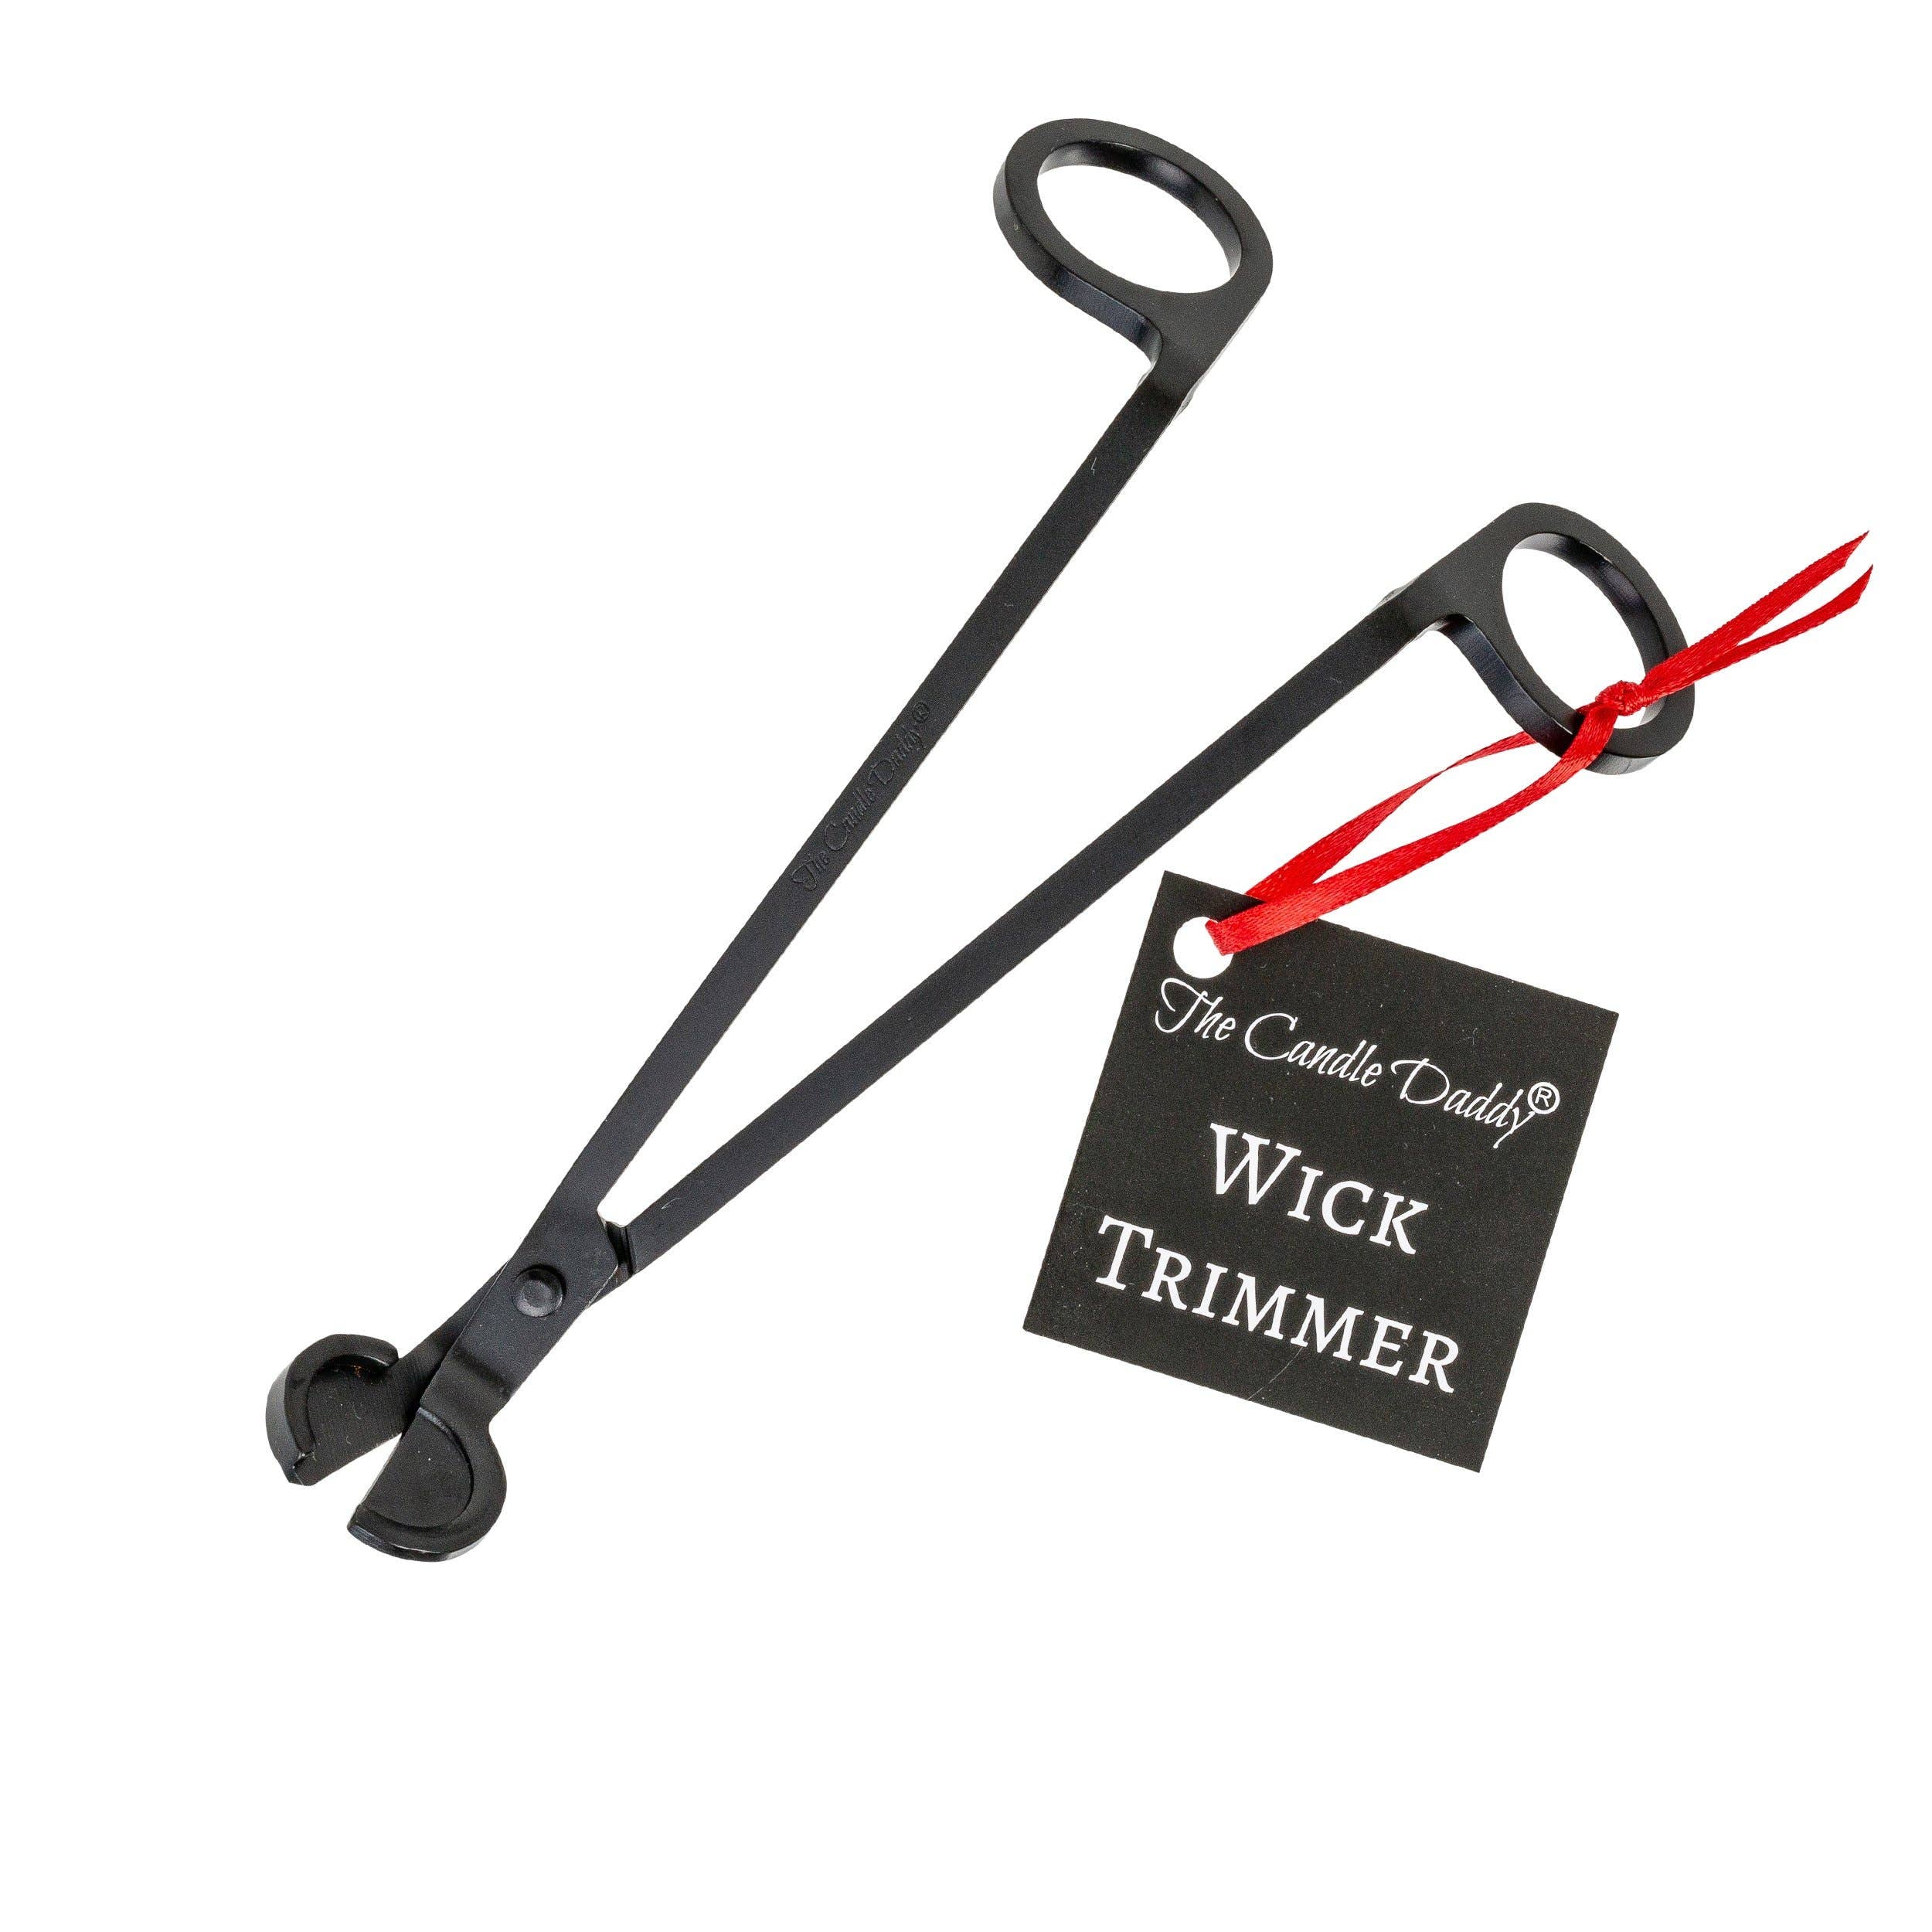 Candle Wick Trimmer, Mate Black Candle Wick Trimmer